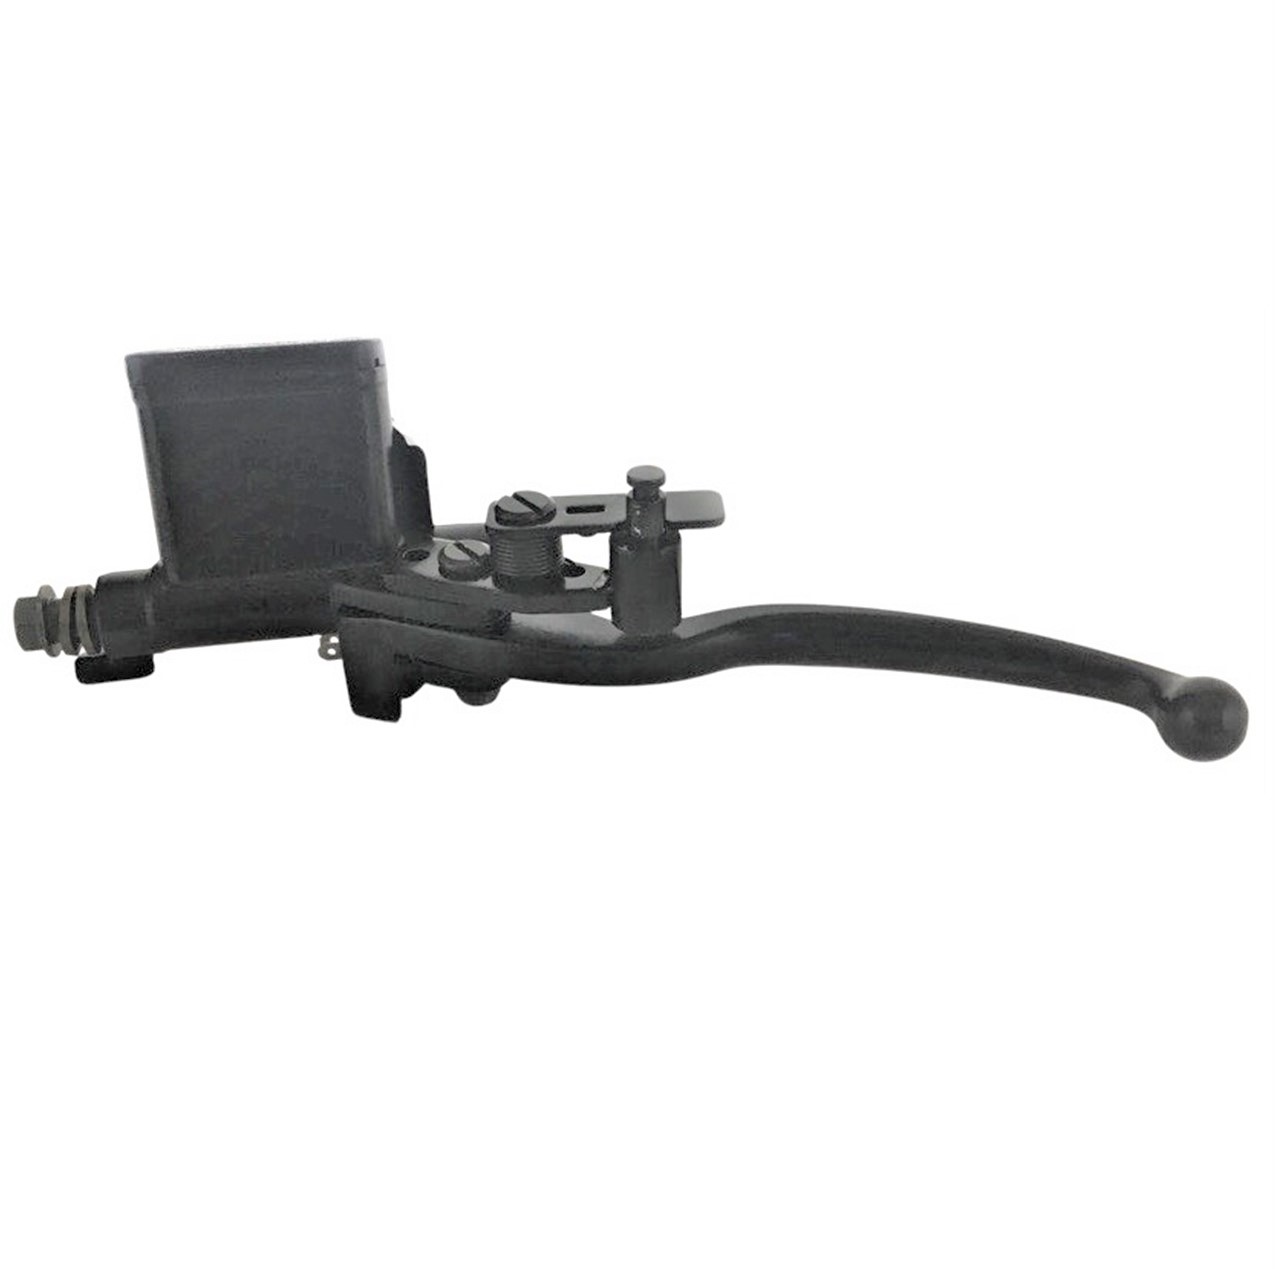 BRAKE LEVER & MASTER CYLINDER (Left Hand) Fits many ATVs & scooters - Click Image to Close